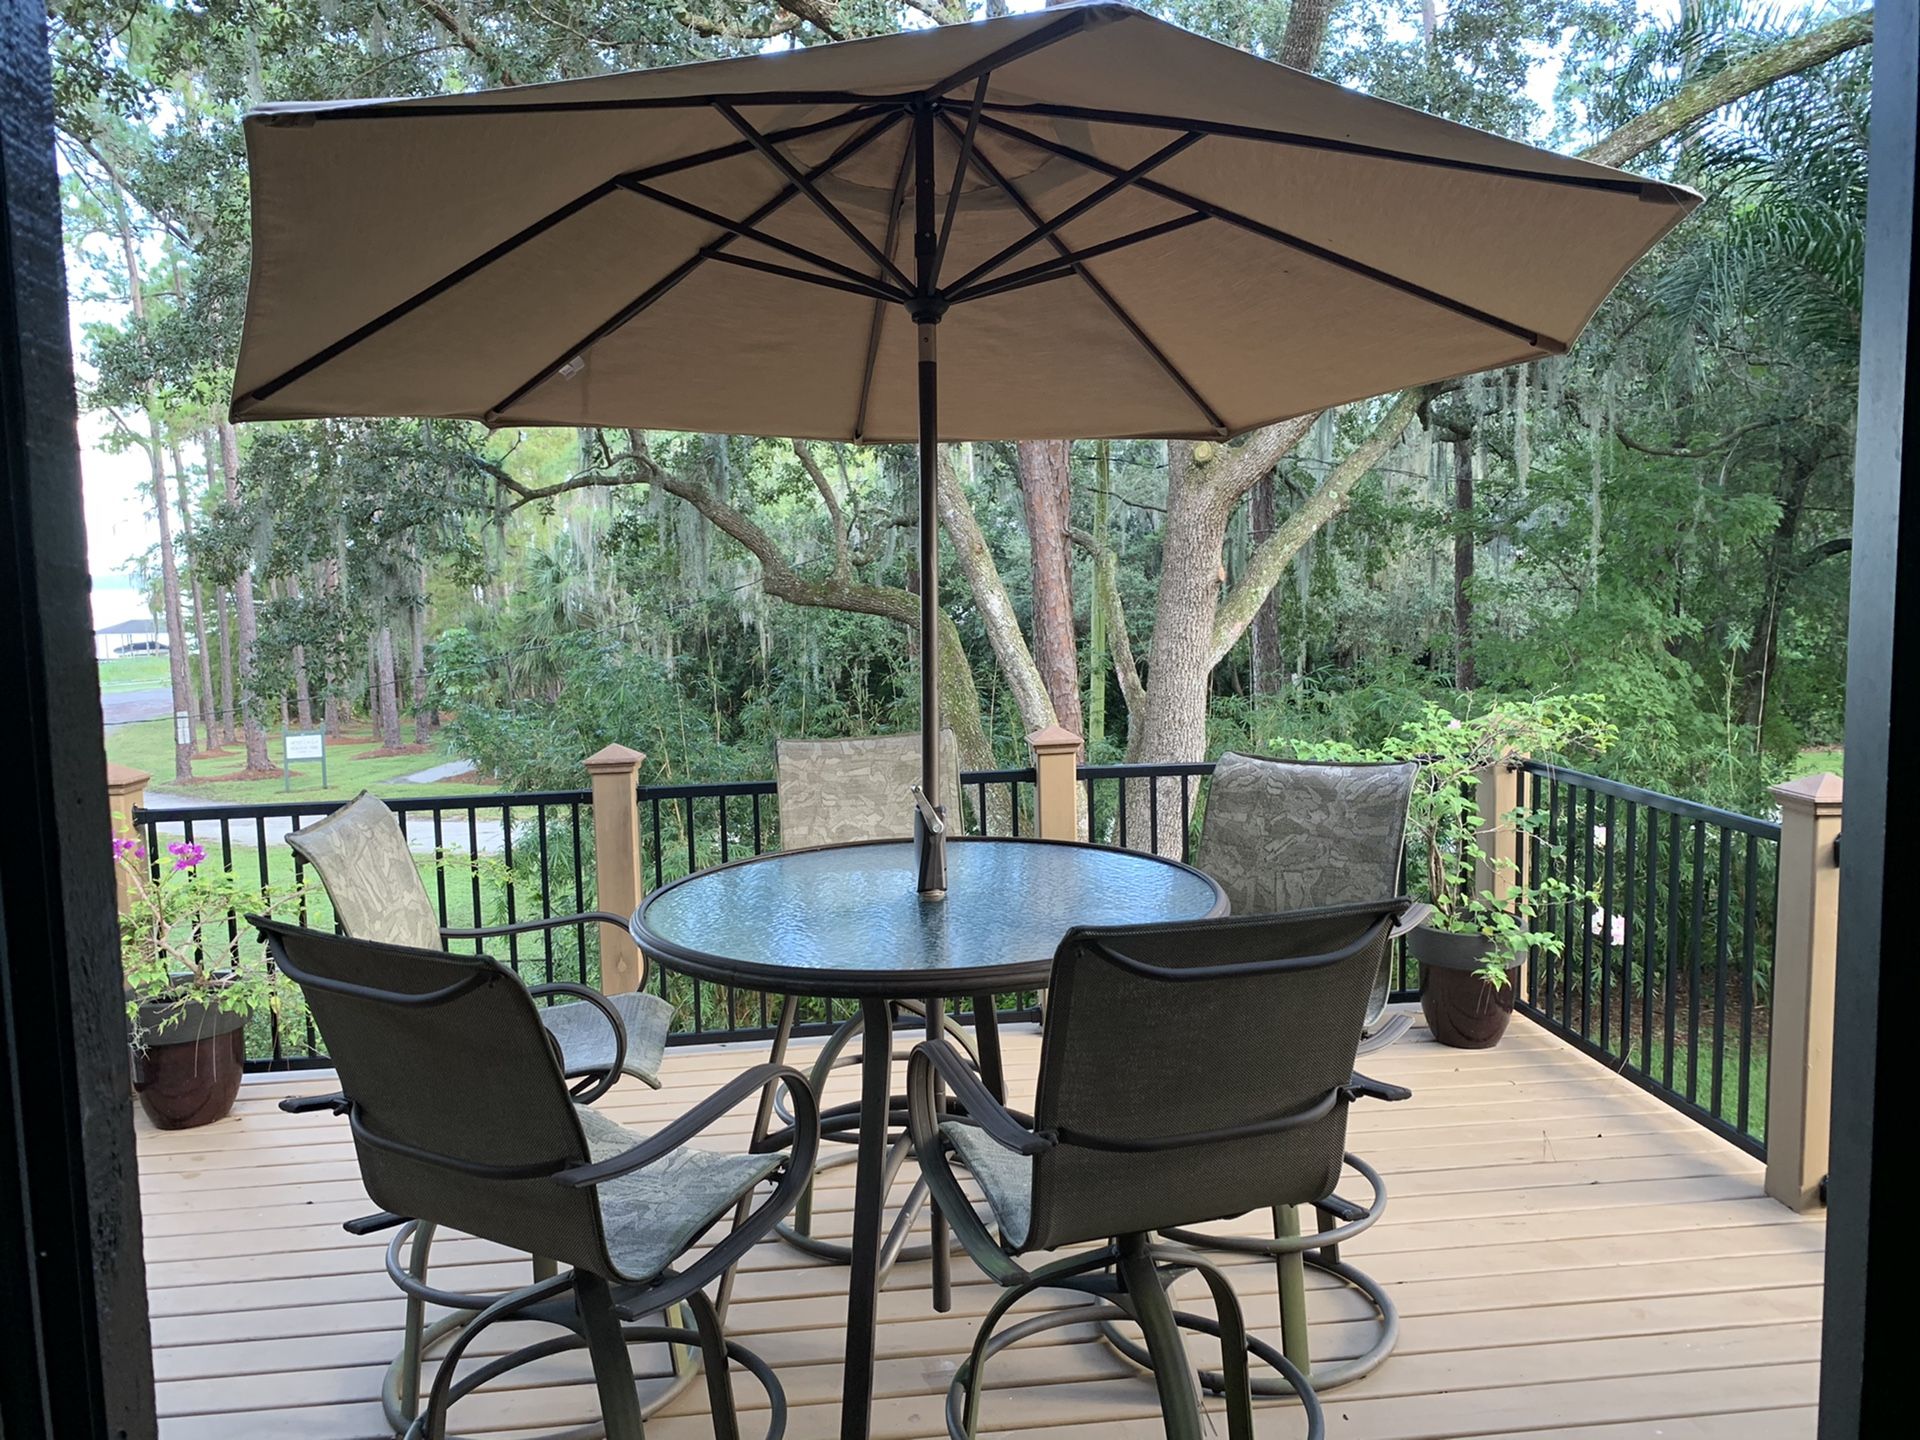 Quality Aluminum Patio Set - When we bought it new it was $2000